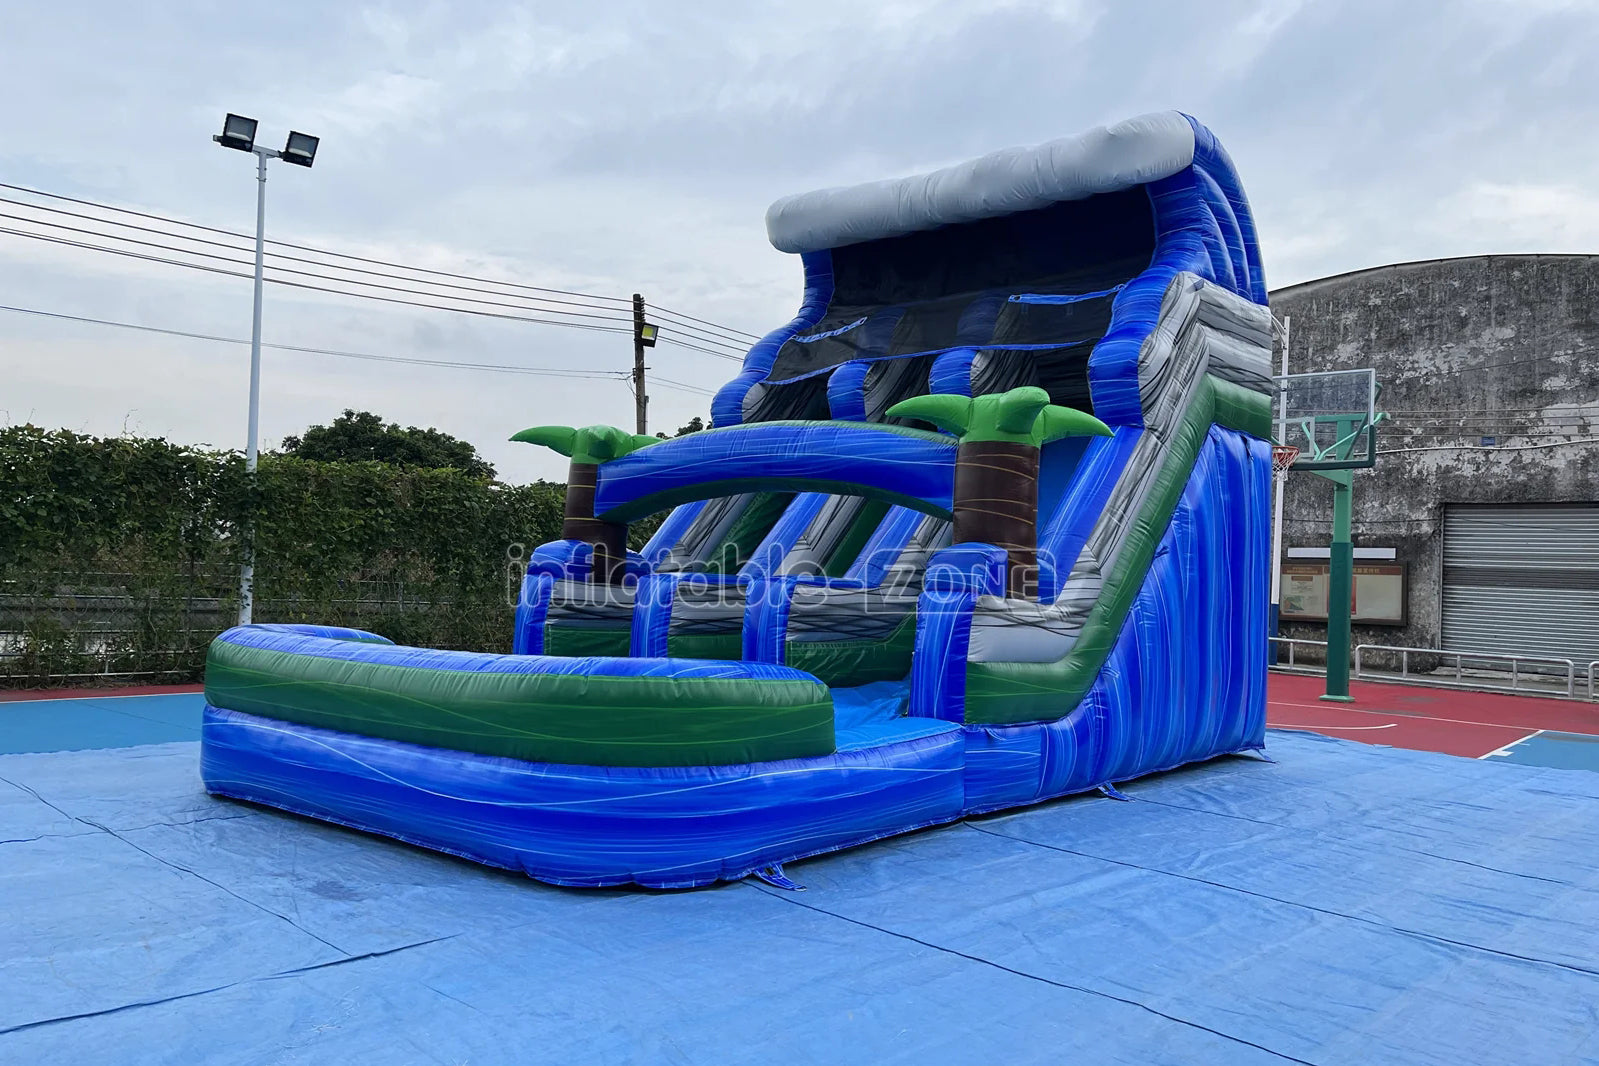 Make a Splash with Inflatable-Zone: Your Ultimate Guide to Buying an Inflatable Water Slide